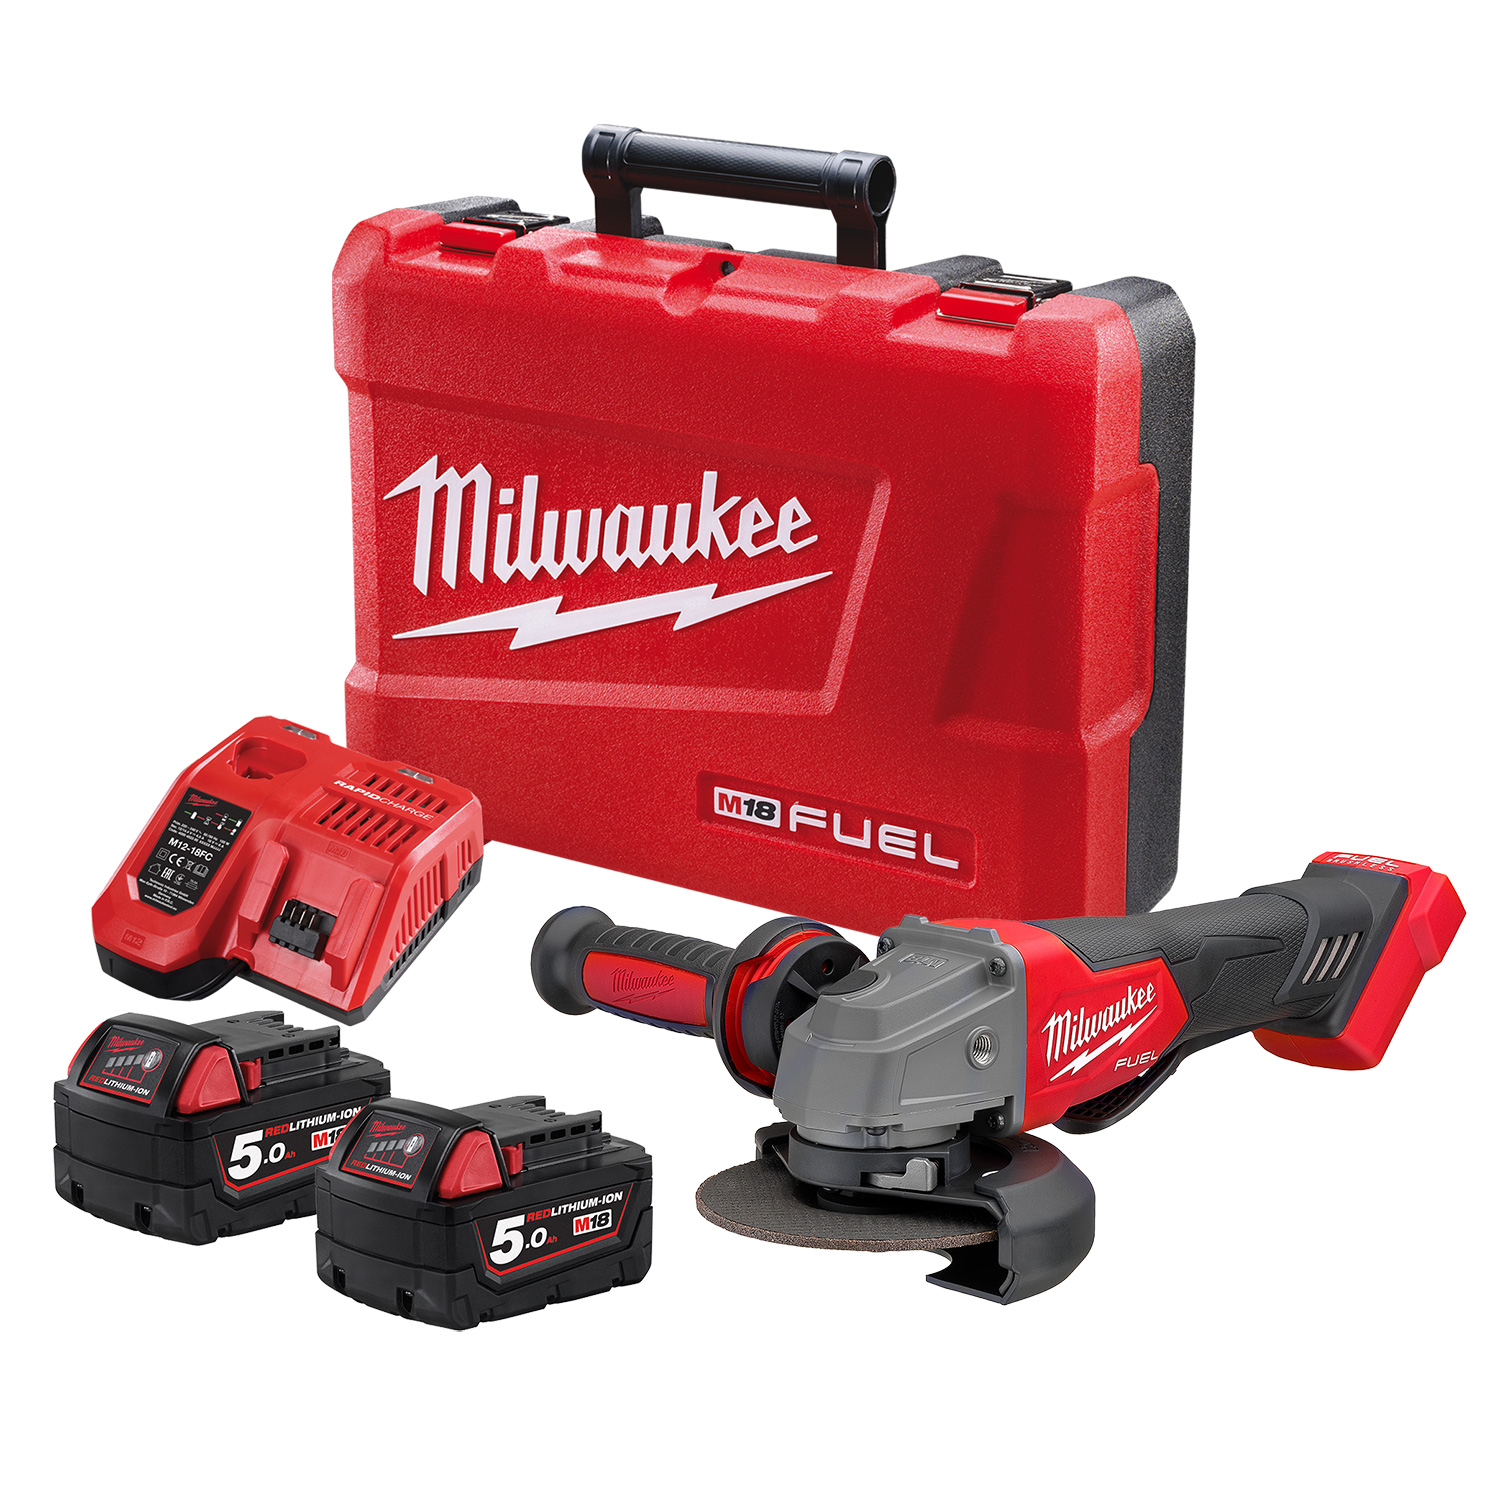 Milwaukee 18V Fuel Brushless 125mm (5") Angle Grinder with Deadman Paddle Switch 5.0ah Set M18FAG125XPD-502C